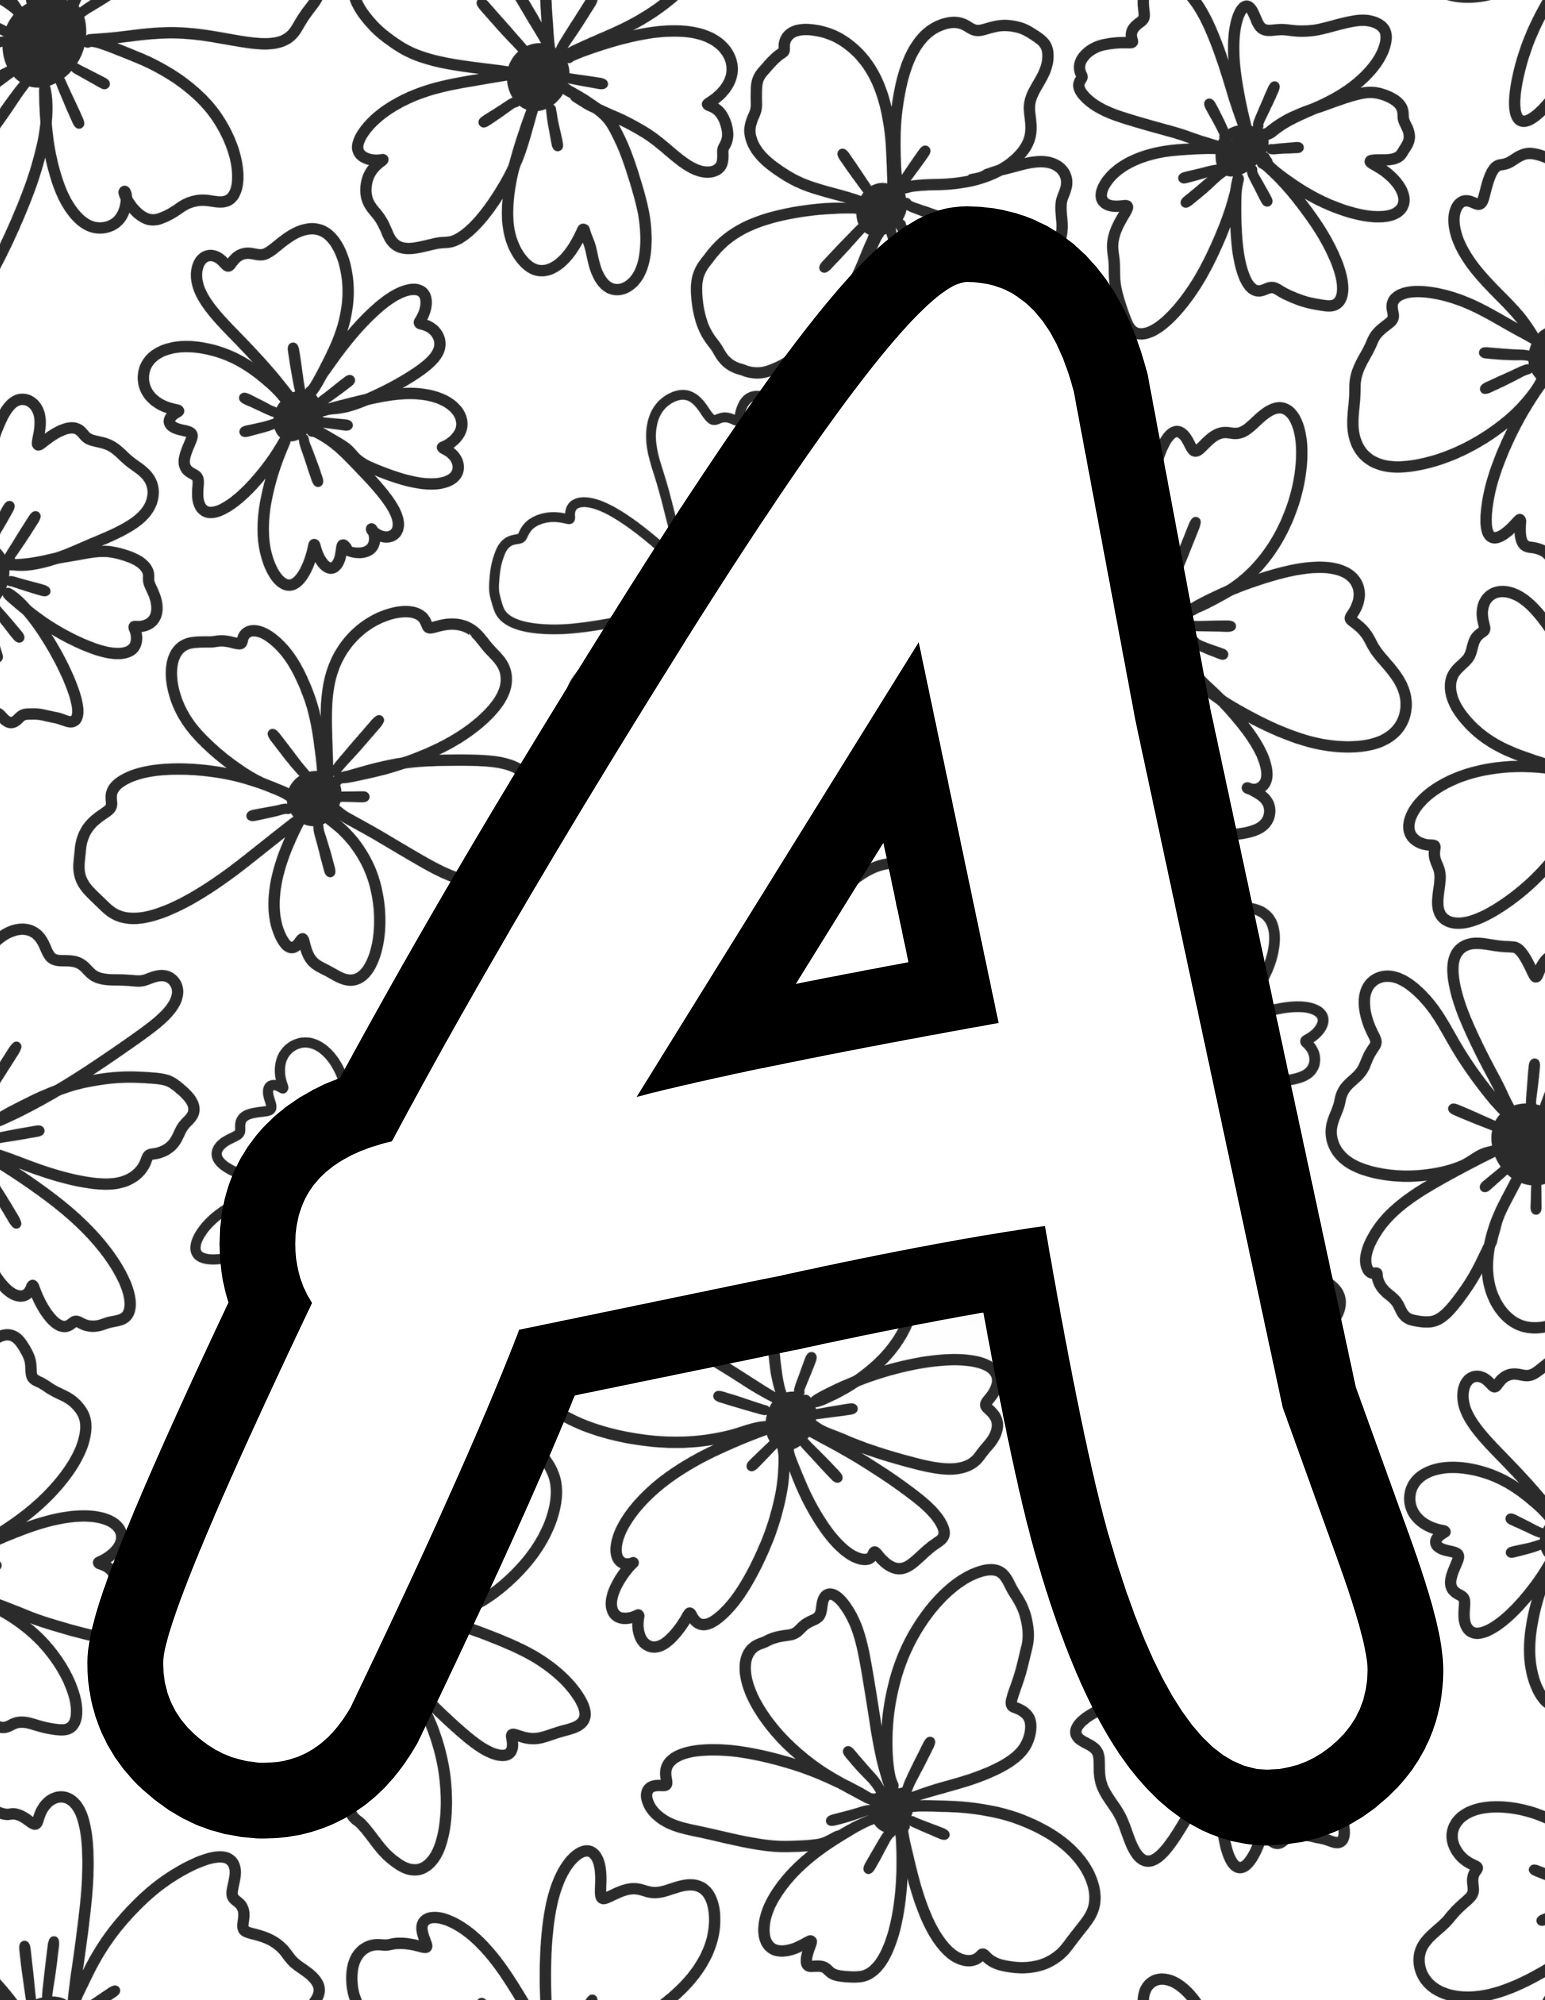 Free Printable Abc Coloring Pages: Learn Alphabet Letters! | Skip intended for Free Printable Alphabet Letters Coloring Pages